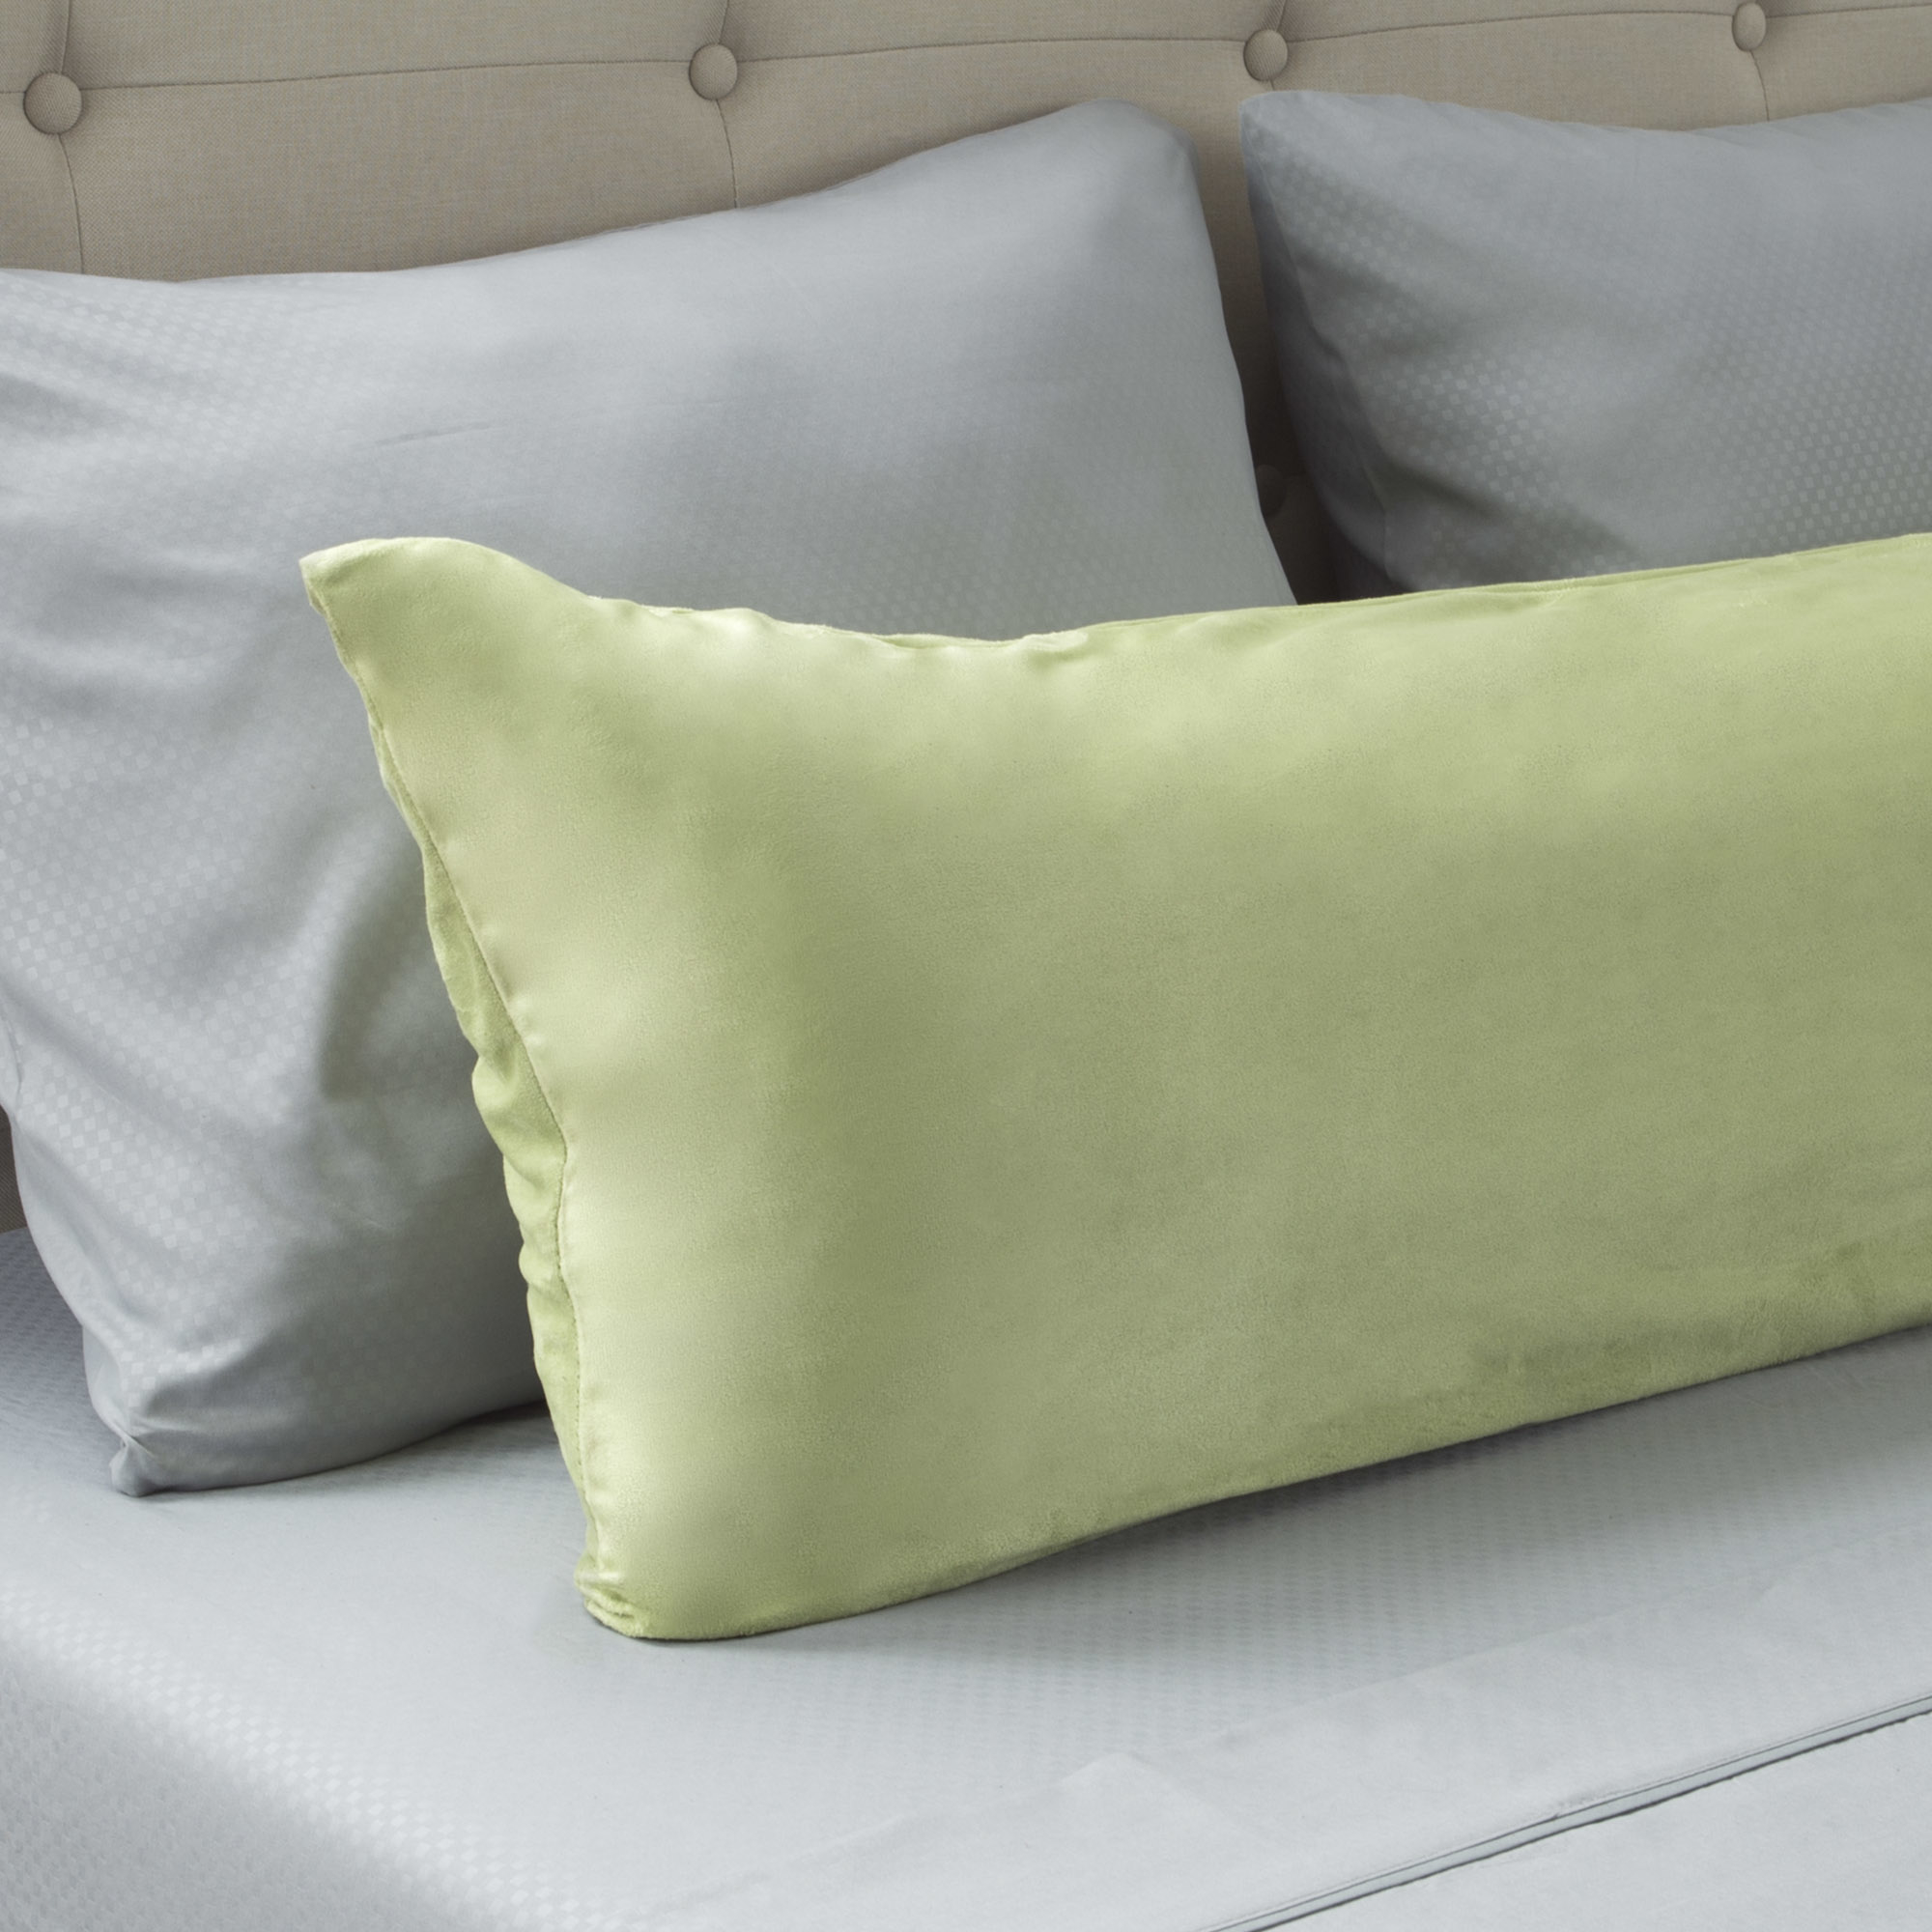 Microsuede Body Pillow Cover Pillowcase Zippered Washable 51 X 17 Inches Pistachio